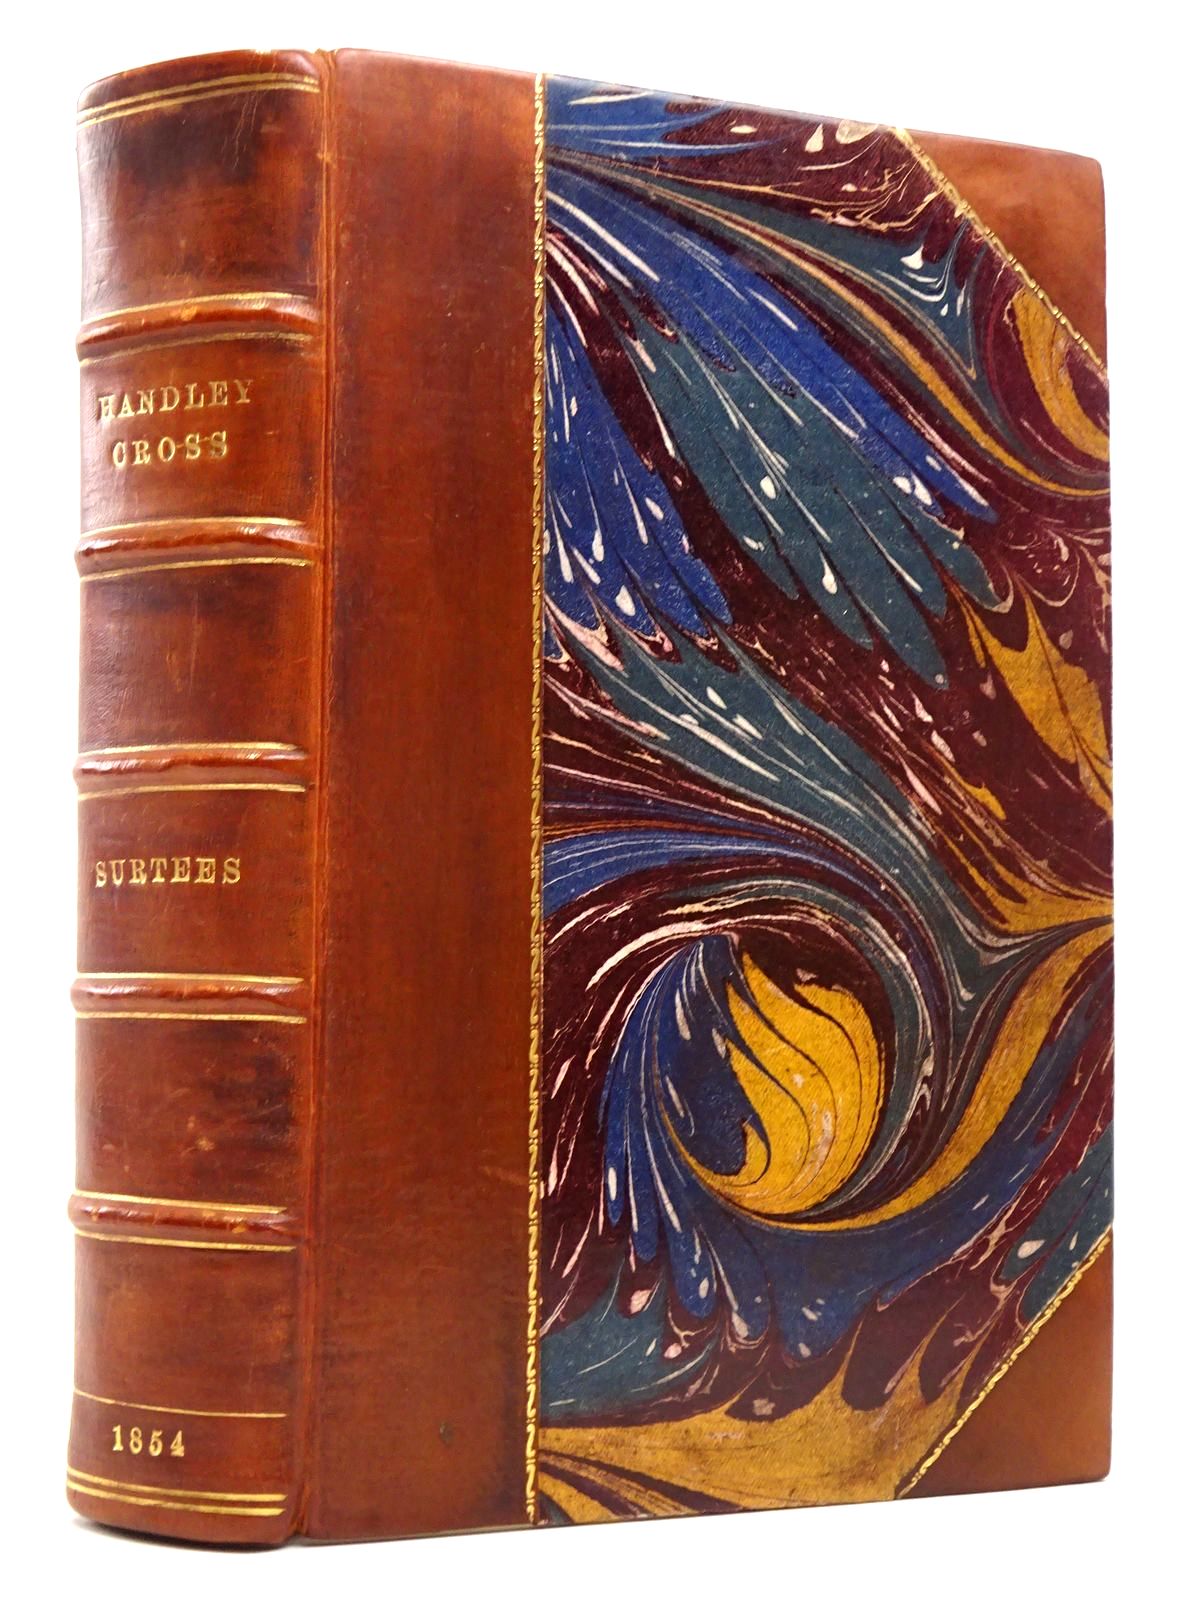 Photo of HANDLEY CROSS OR MR. JORROCKS'S HUNT written by Surtees, R.S. illustrated by Leech, John published by Bradbury, Agnew & Co. Ltd. (STOCK CODE: 1817631)  for sale by Stella & Rose's Books